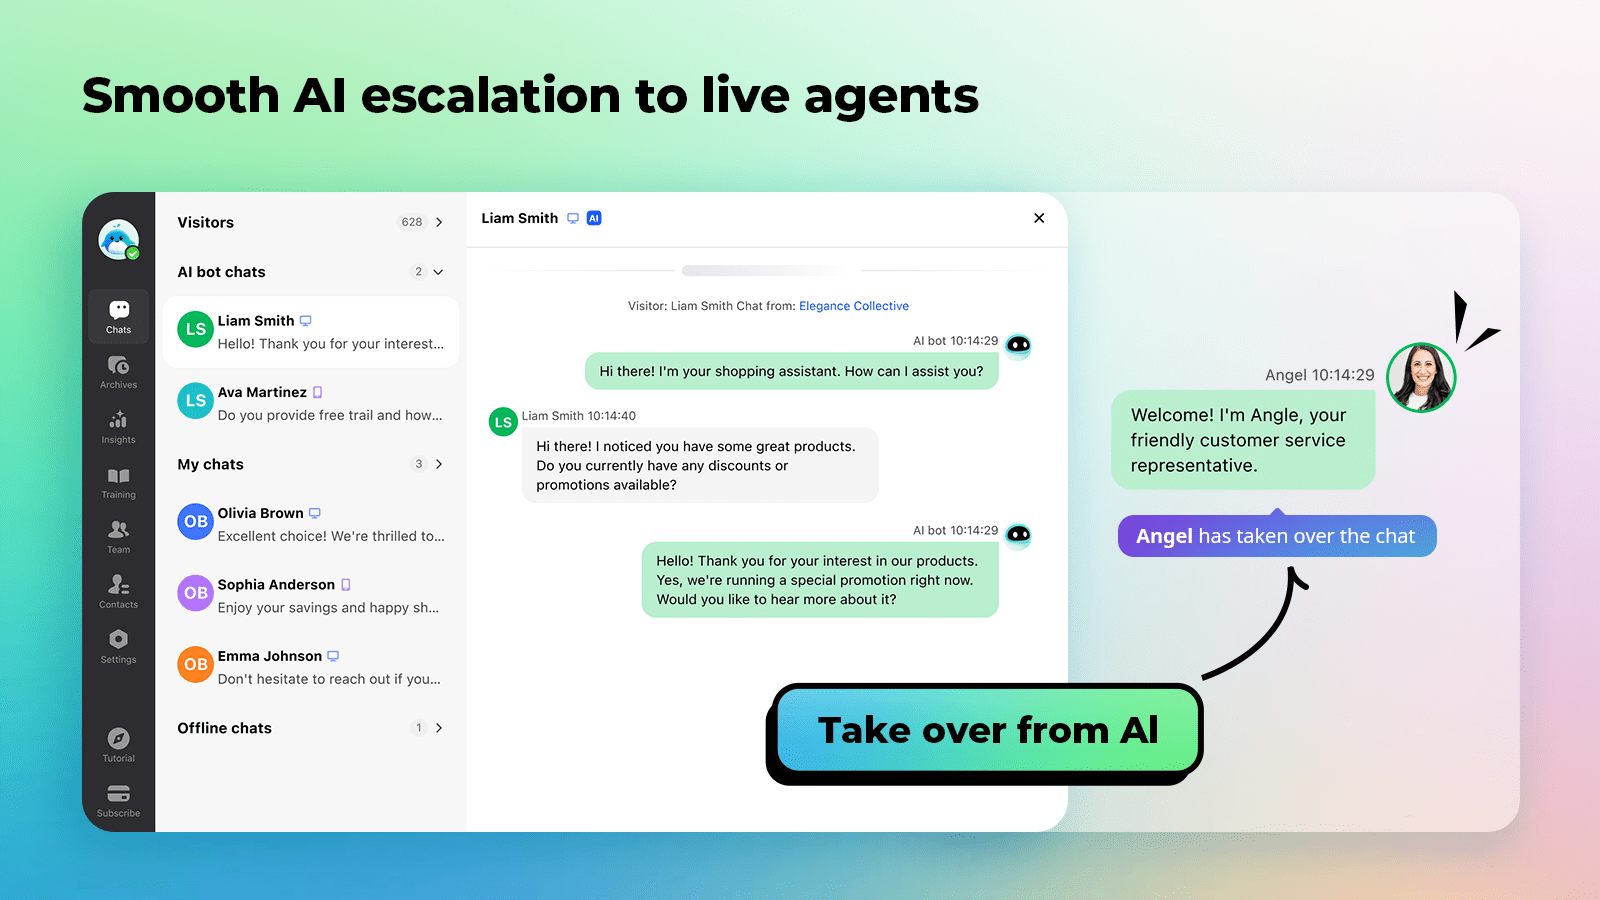 Smooth AI escalation to live agents